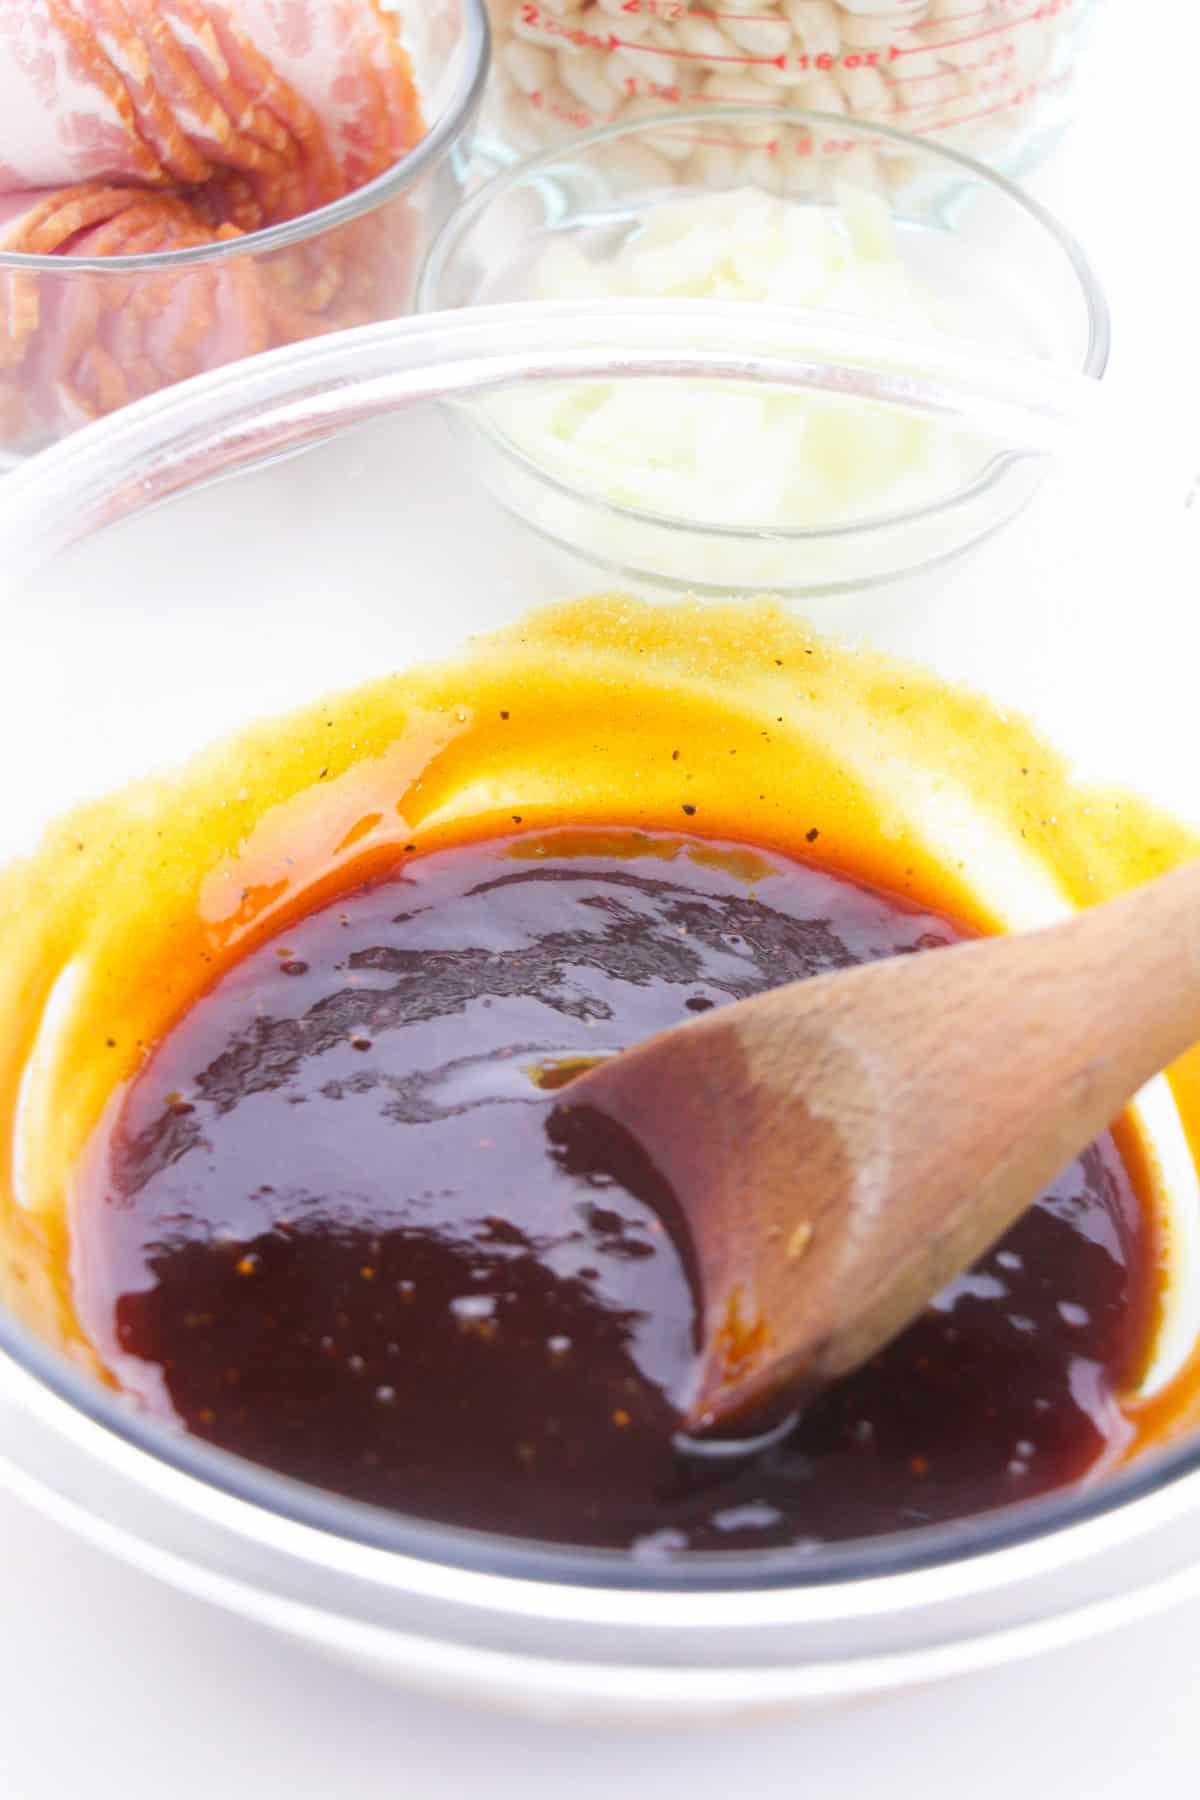 Thick, dark brown sauce in a glass bowl with a wooden spoon.